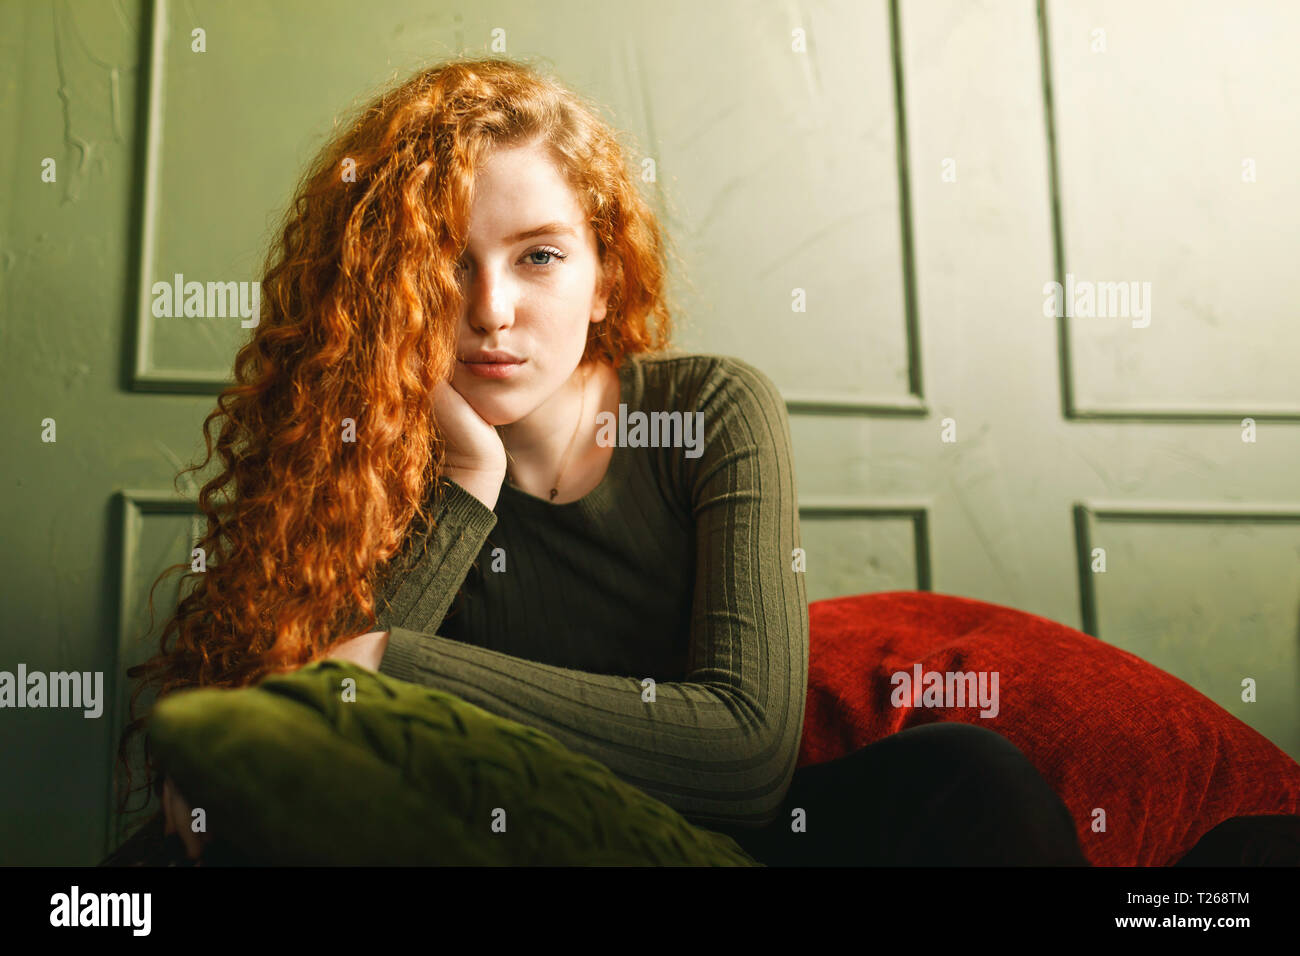 Curly ginger girl propped up her head and looking to the camera while sitting at the sofa around the pillows in the green interior Stock Photo